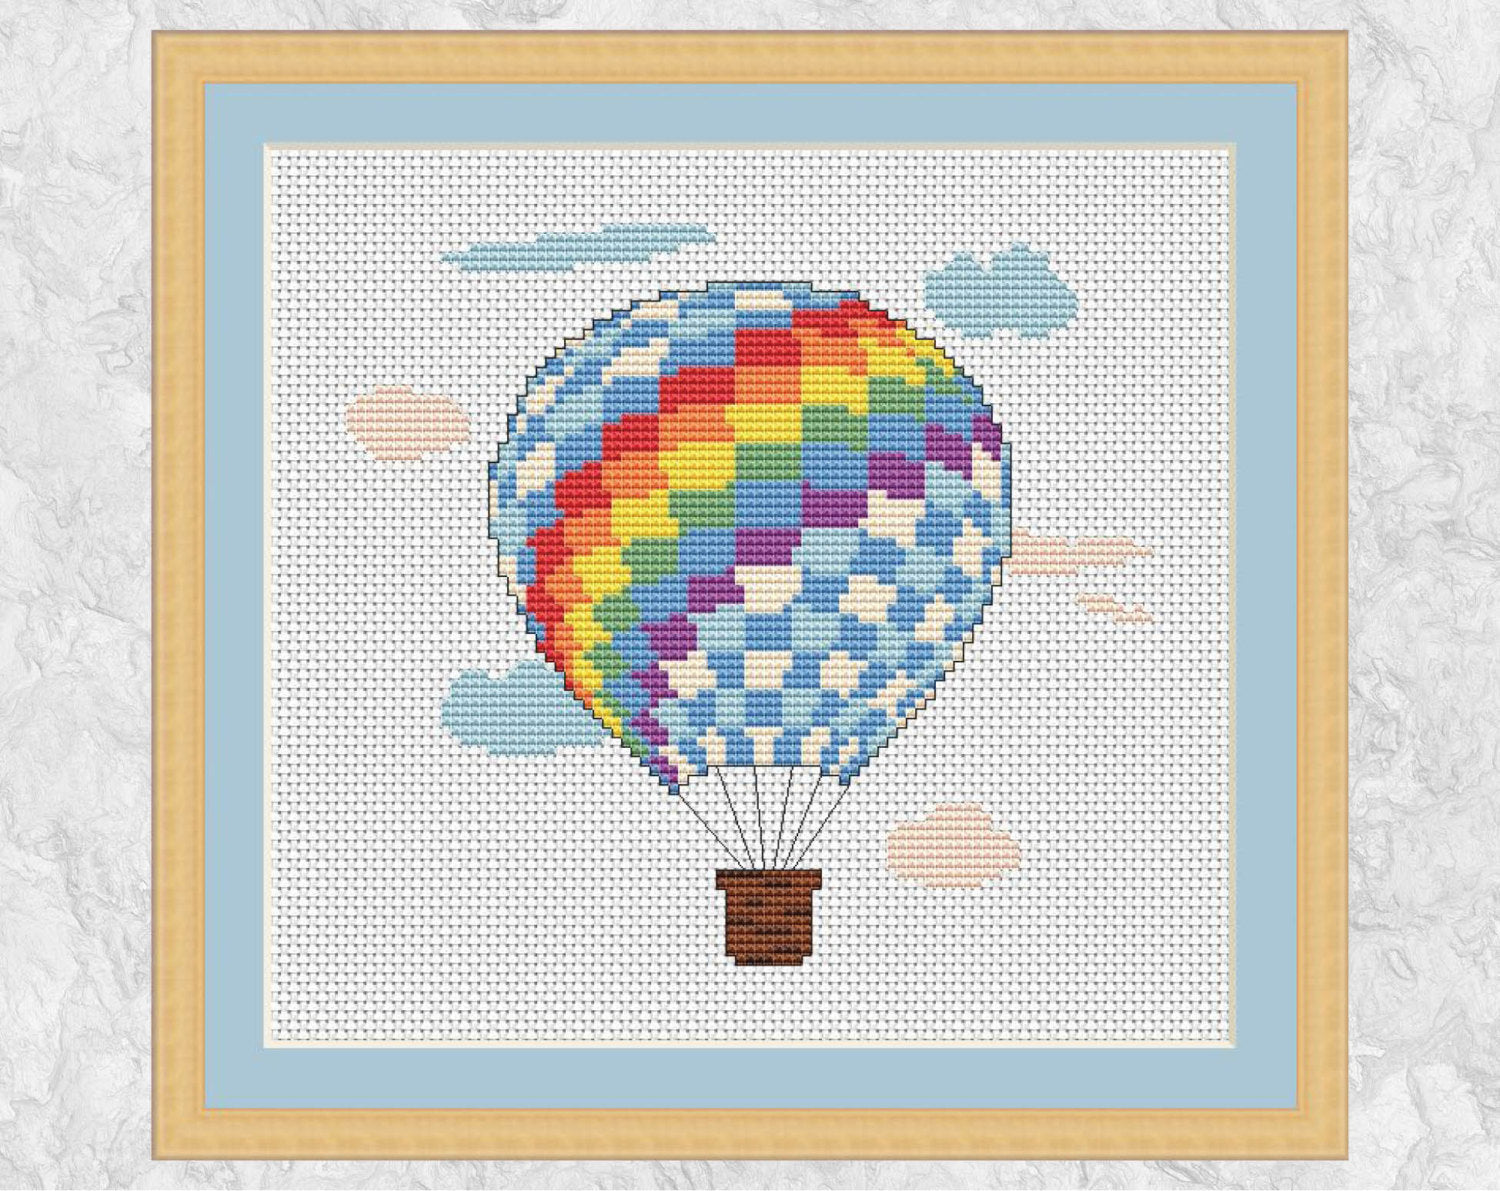 Rainbow Hot Air Balloon cross stitch pattern - with frame